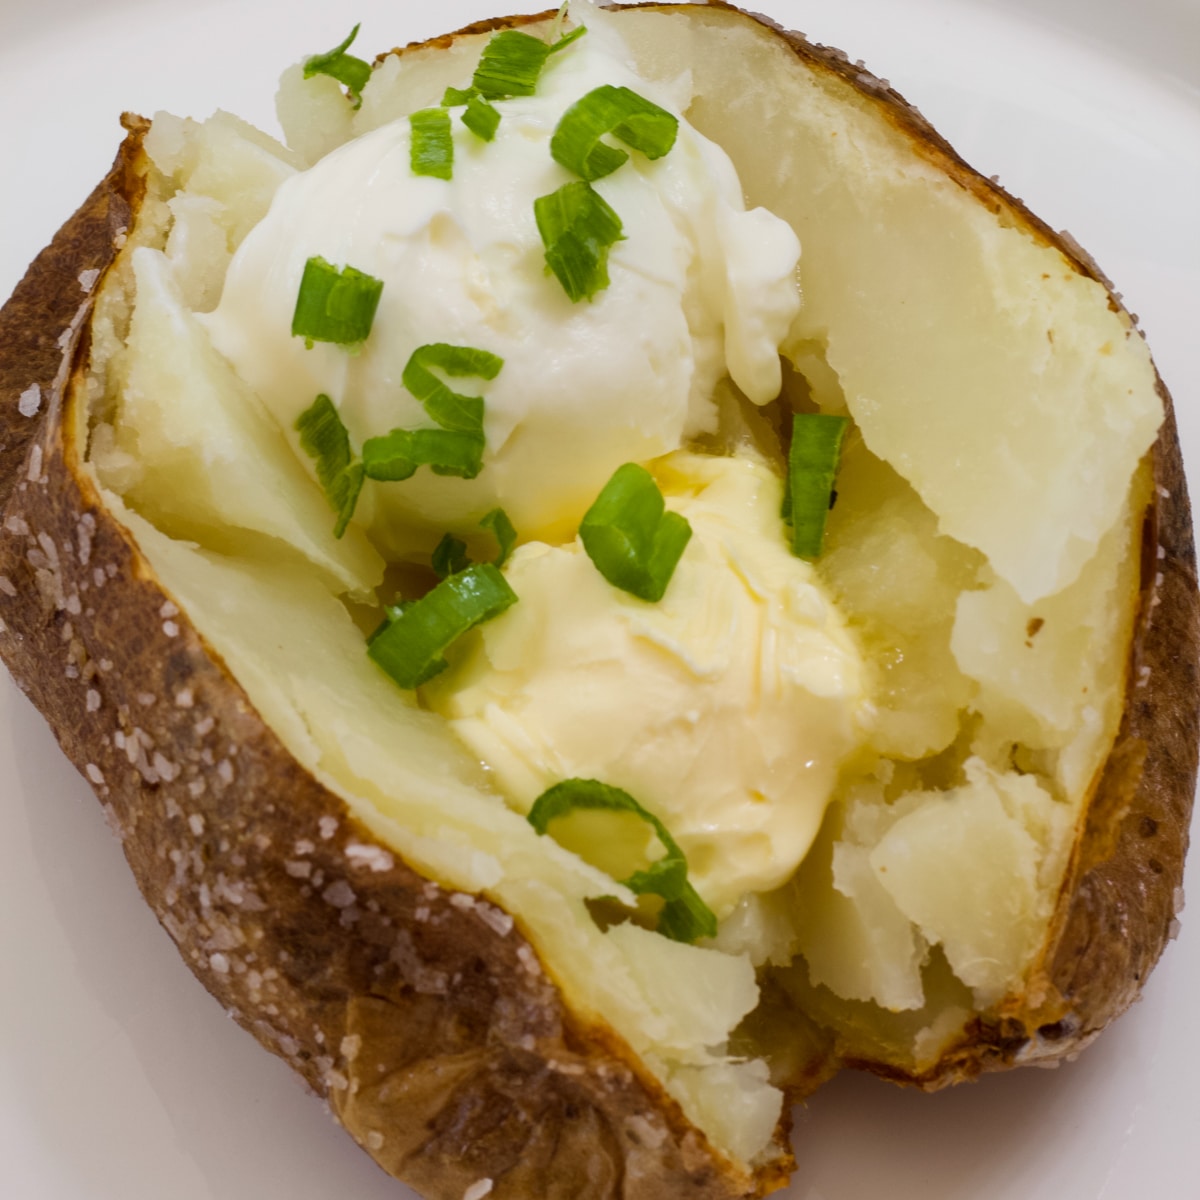 https://www.mindyscookingobsession.com/wp-content/uploads/2023/09/Quick-and-Easy-Air-Fryer-Baked-Potato-Recipe-1200.jpg